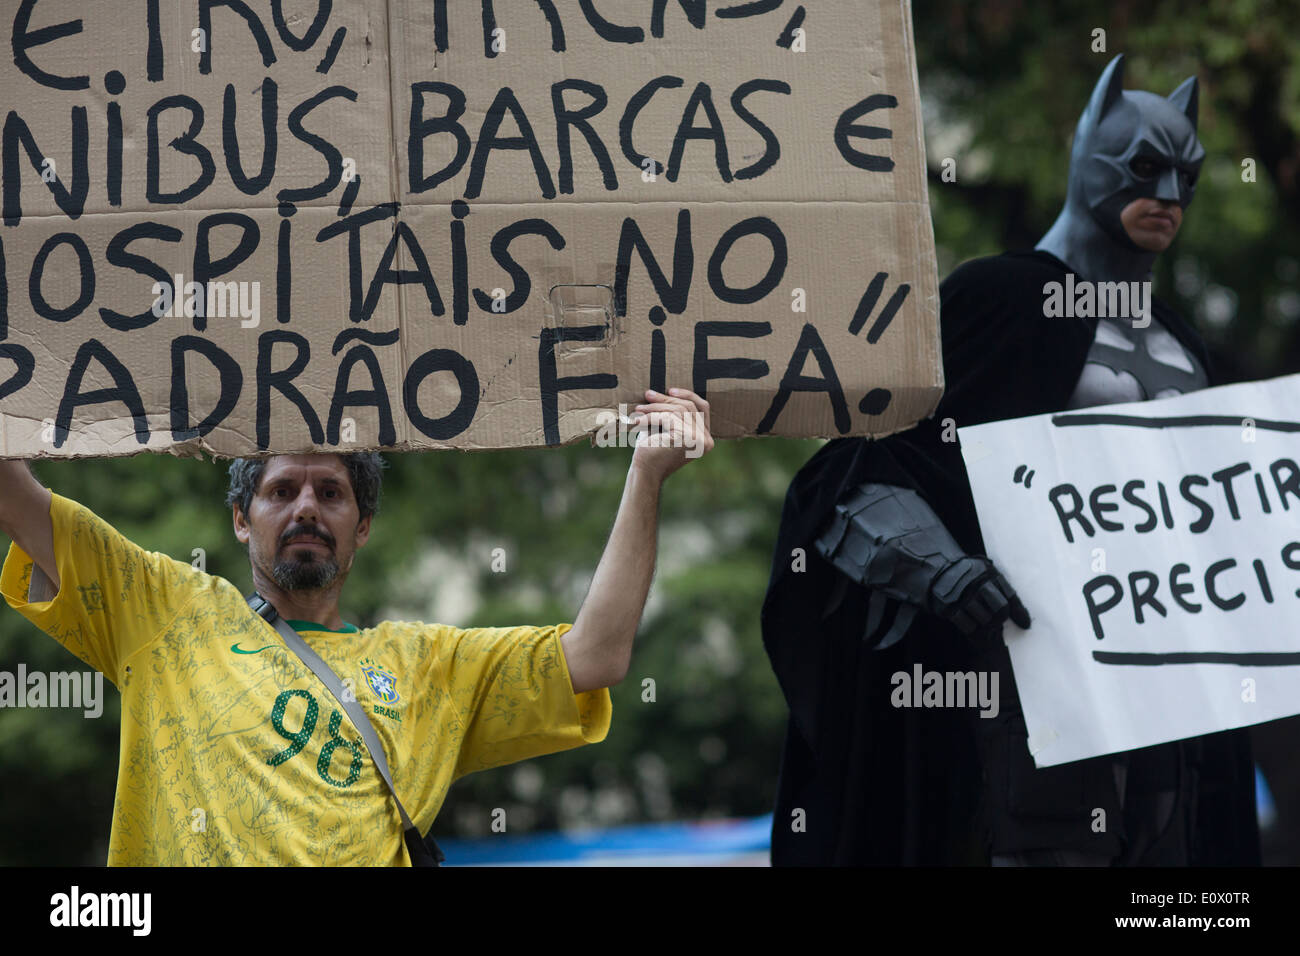 Protests and demonstrations against the 2014 World Cup and social issues in Rio de Janeiro, Brazil Stock Photo